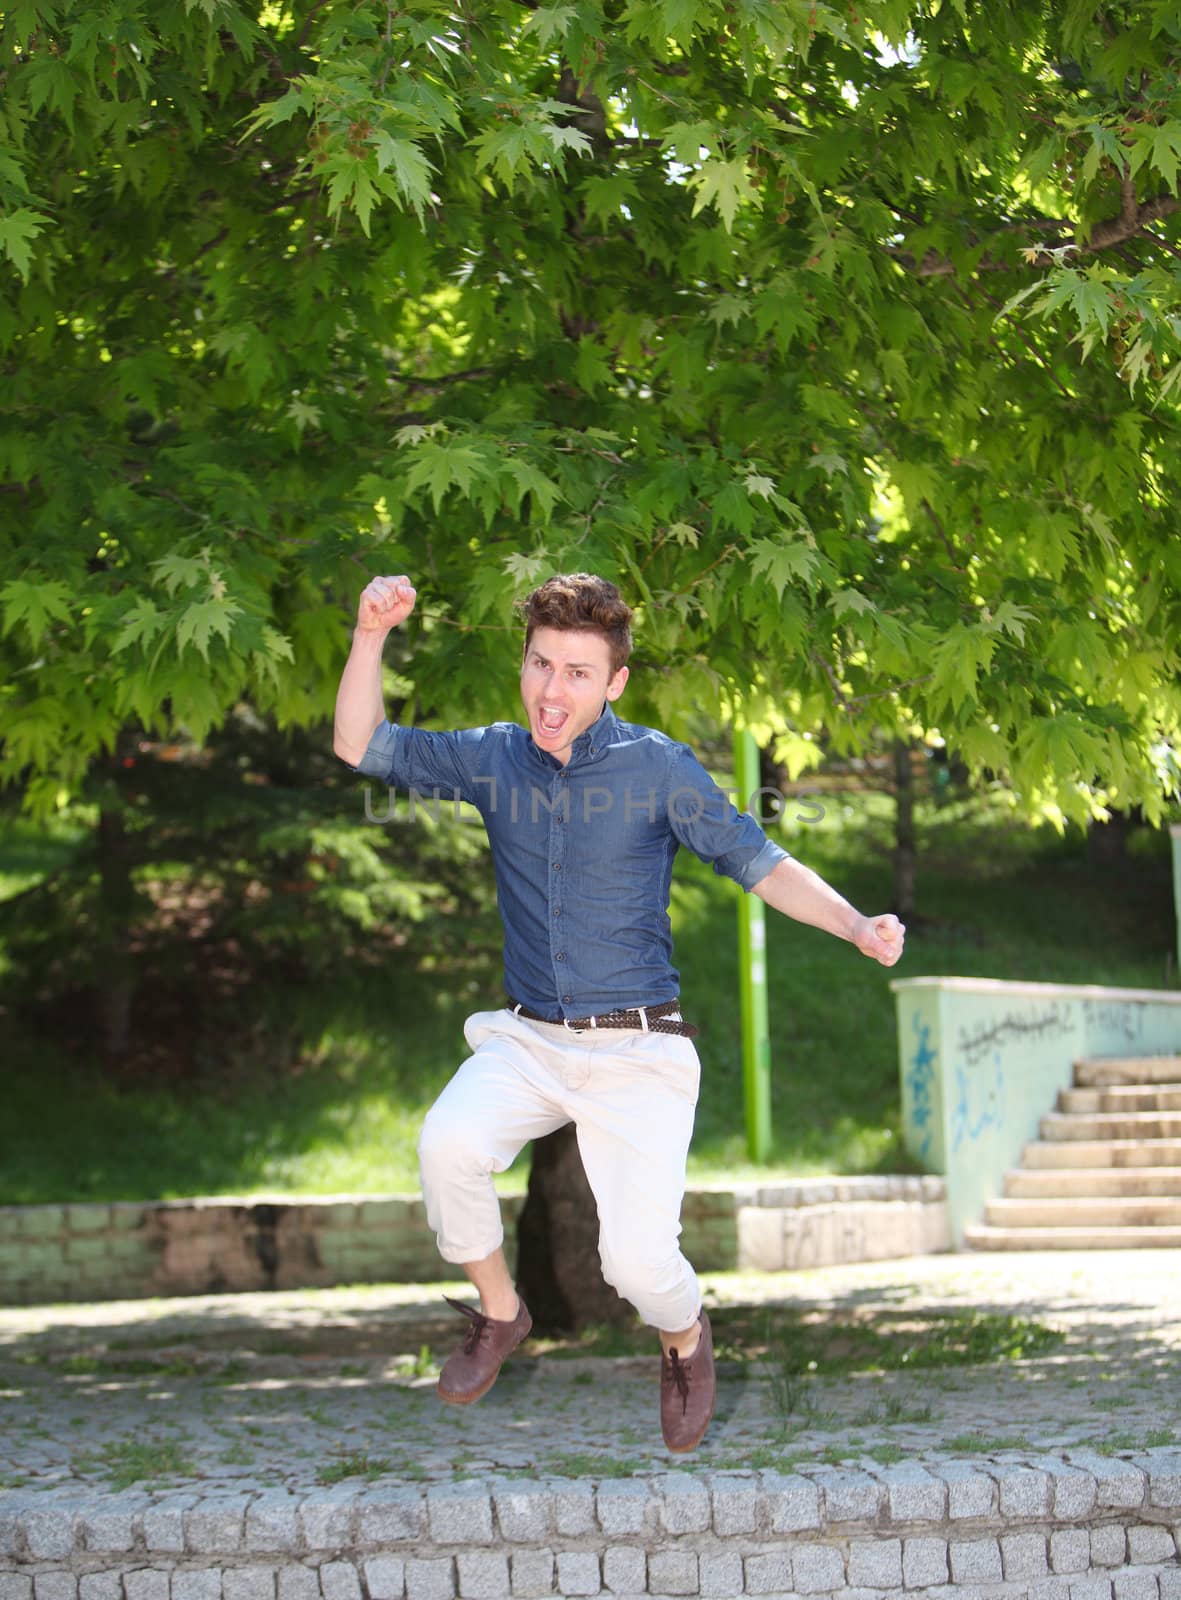 Jumping and happy red hair russian man